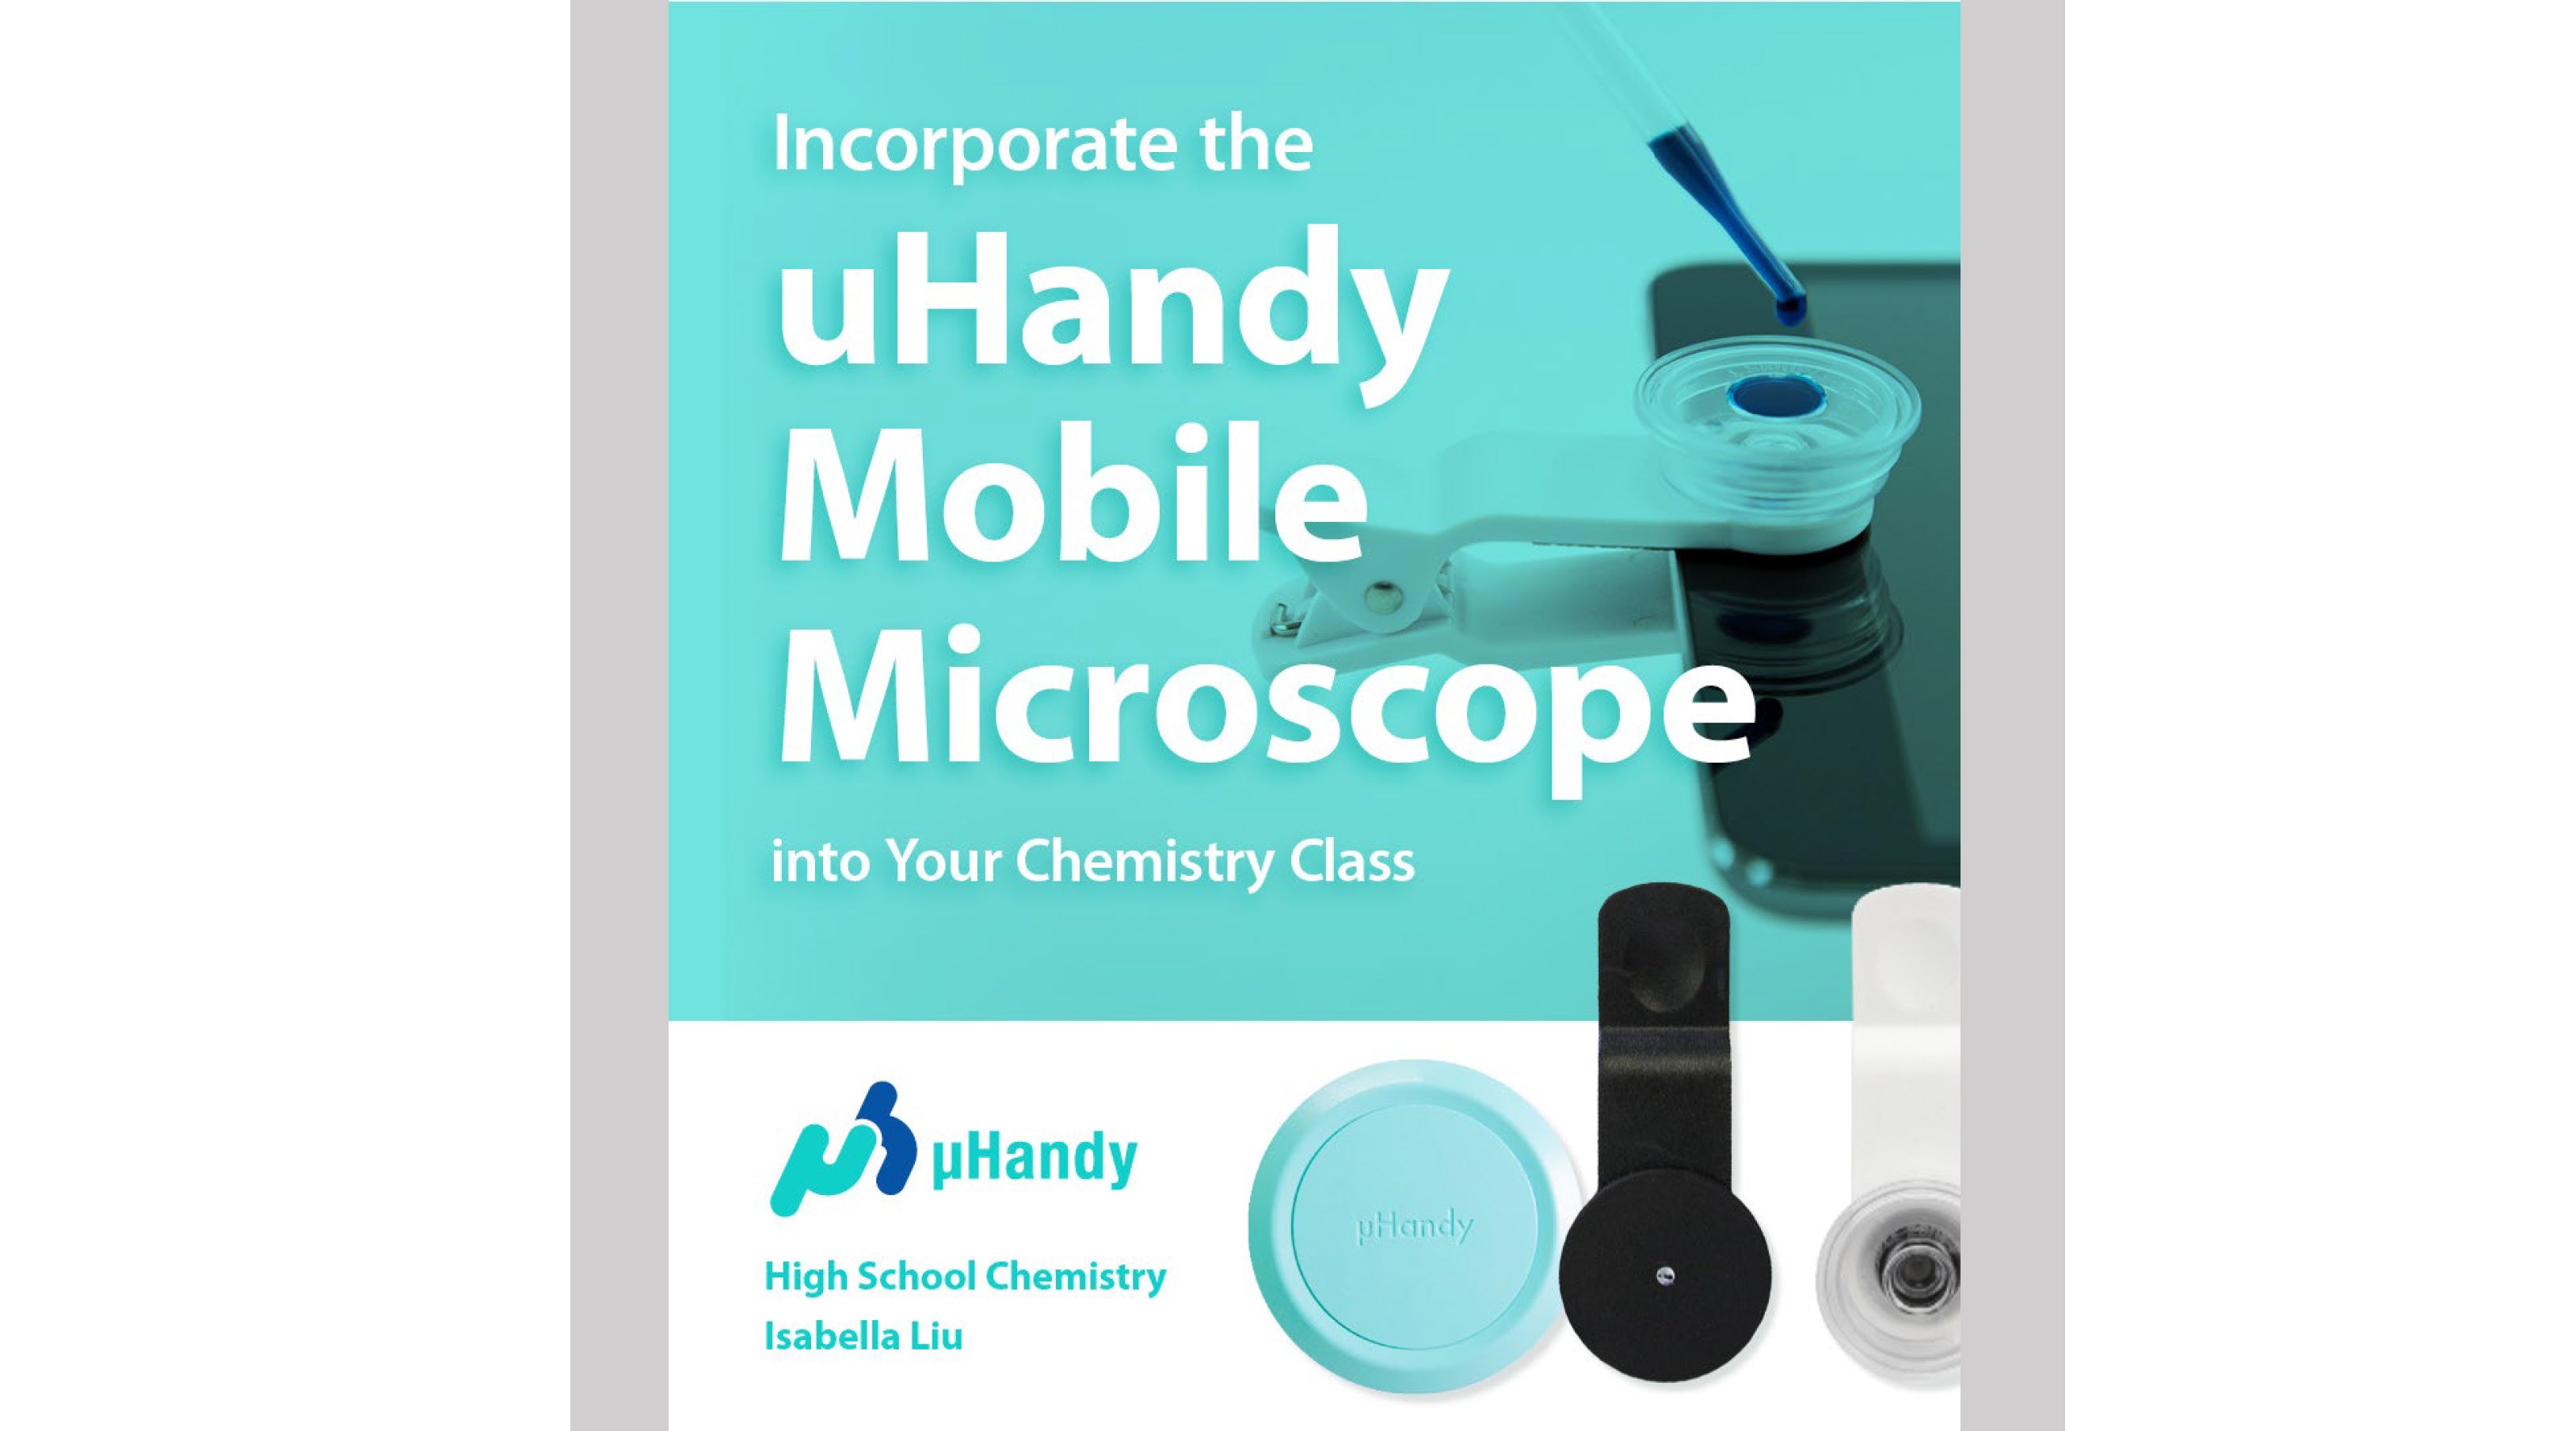 Incorporate the uHandy Mobile Microscope into Your Chemistry Classes  (upgraded to Lite and Pro Kits)